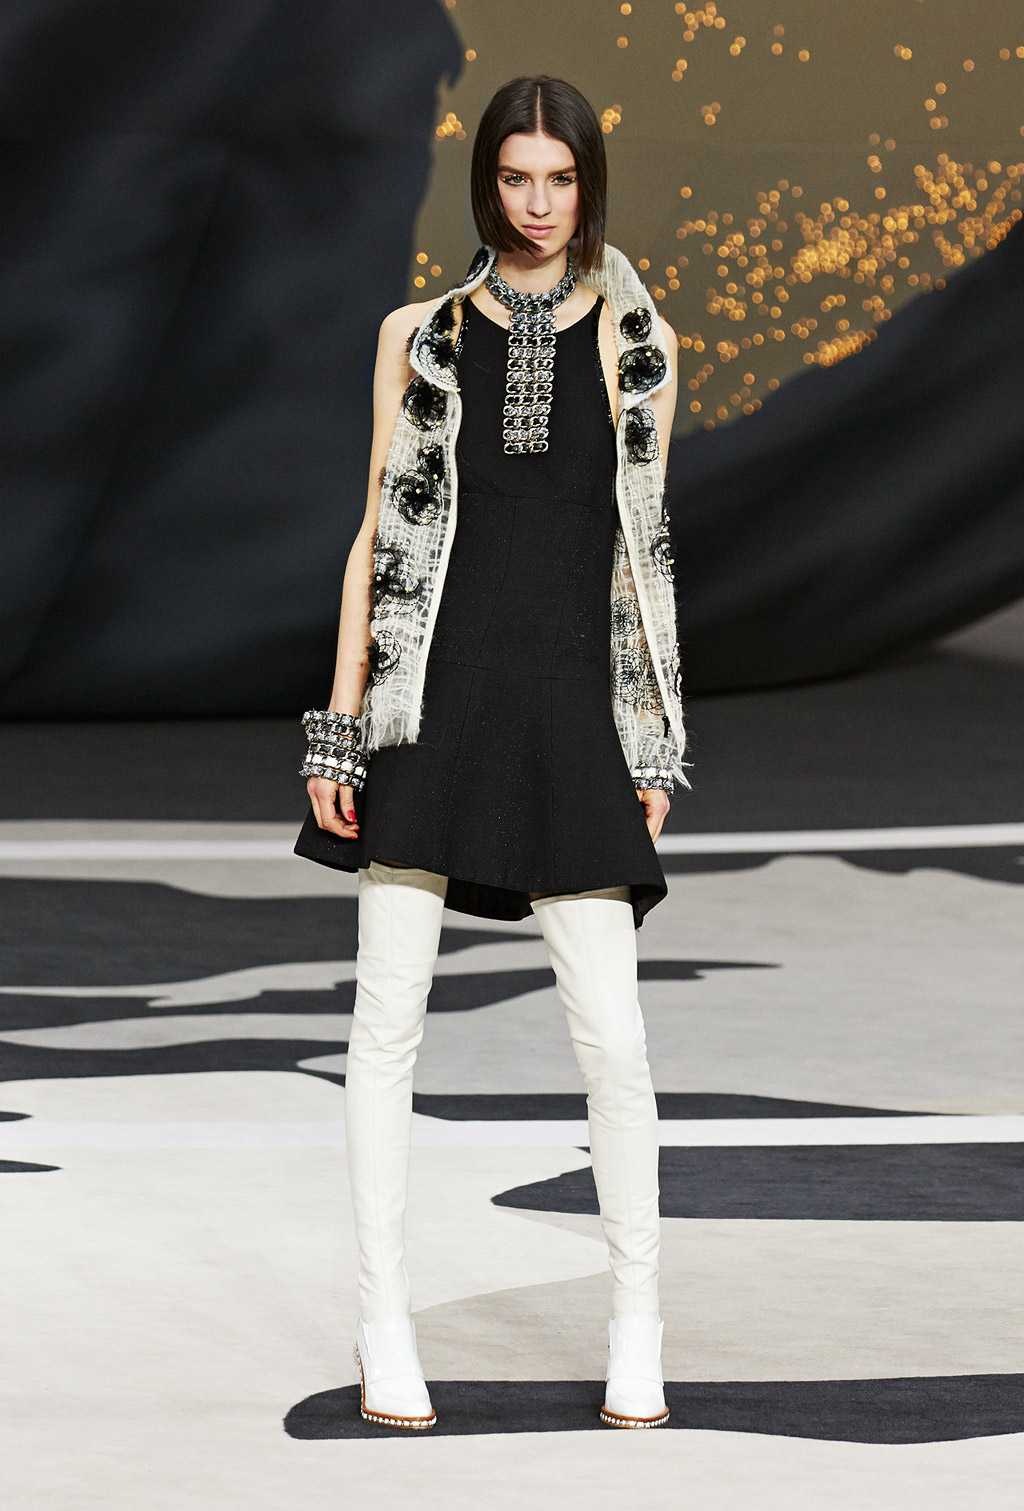 Chanel Fall Winter 2013.14 Womenswear Collection